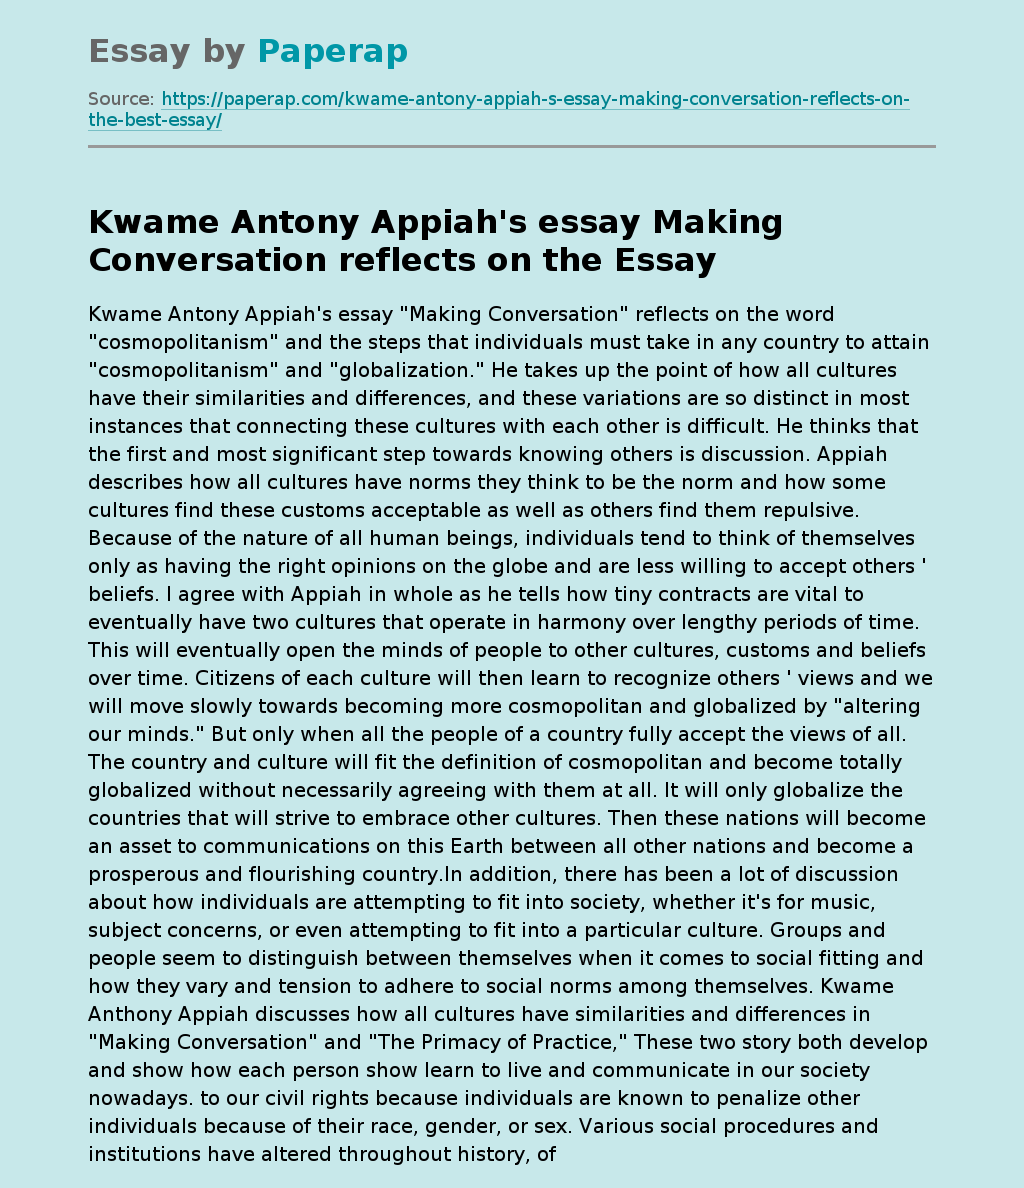 Kwame Antony Appiah's essay Making Conversation reflects on the